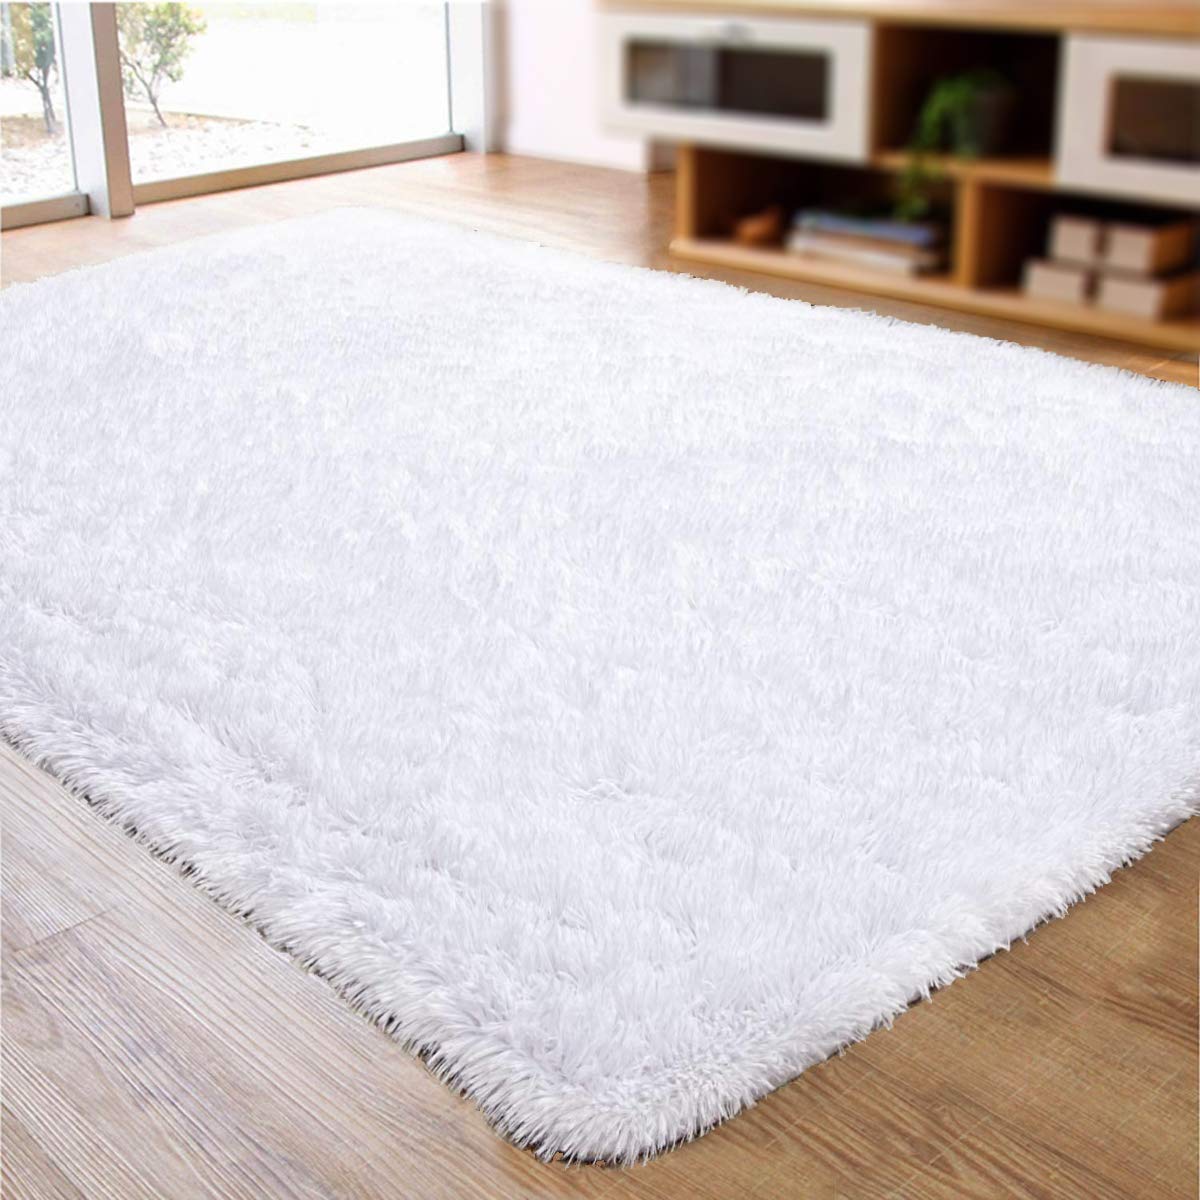 Soft Shaggy Rugs Fluffy Carpet Indoor Modern Plush Area Rugs for Living Room Bedroom Kids Room Nursery Home Decor Featured Image